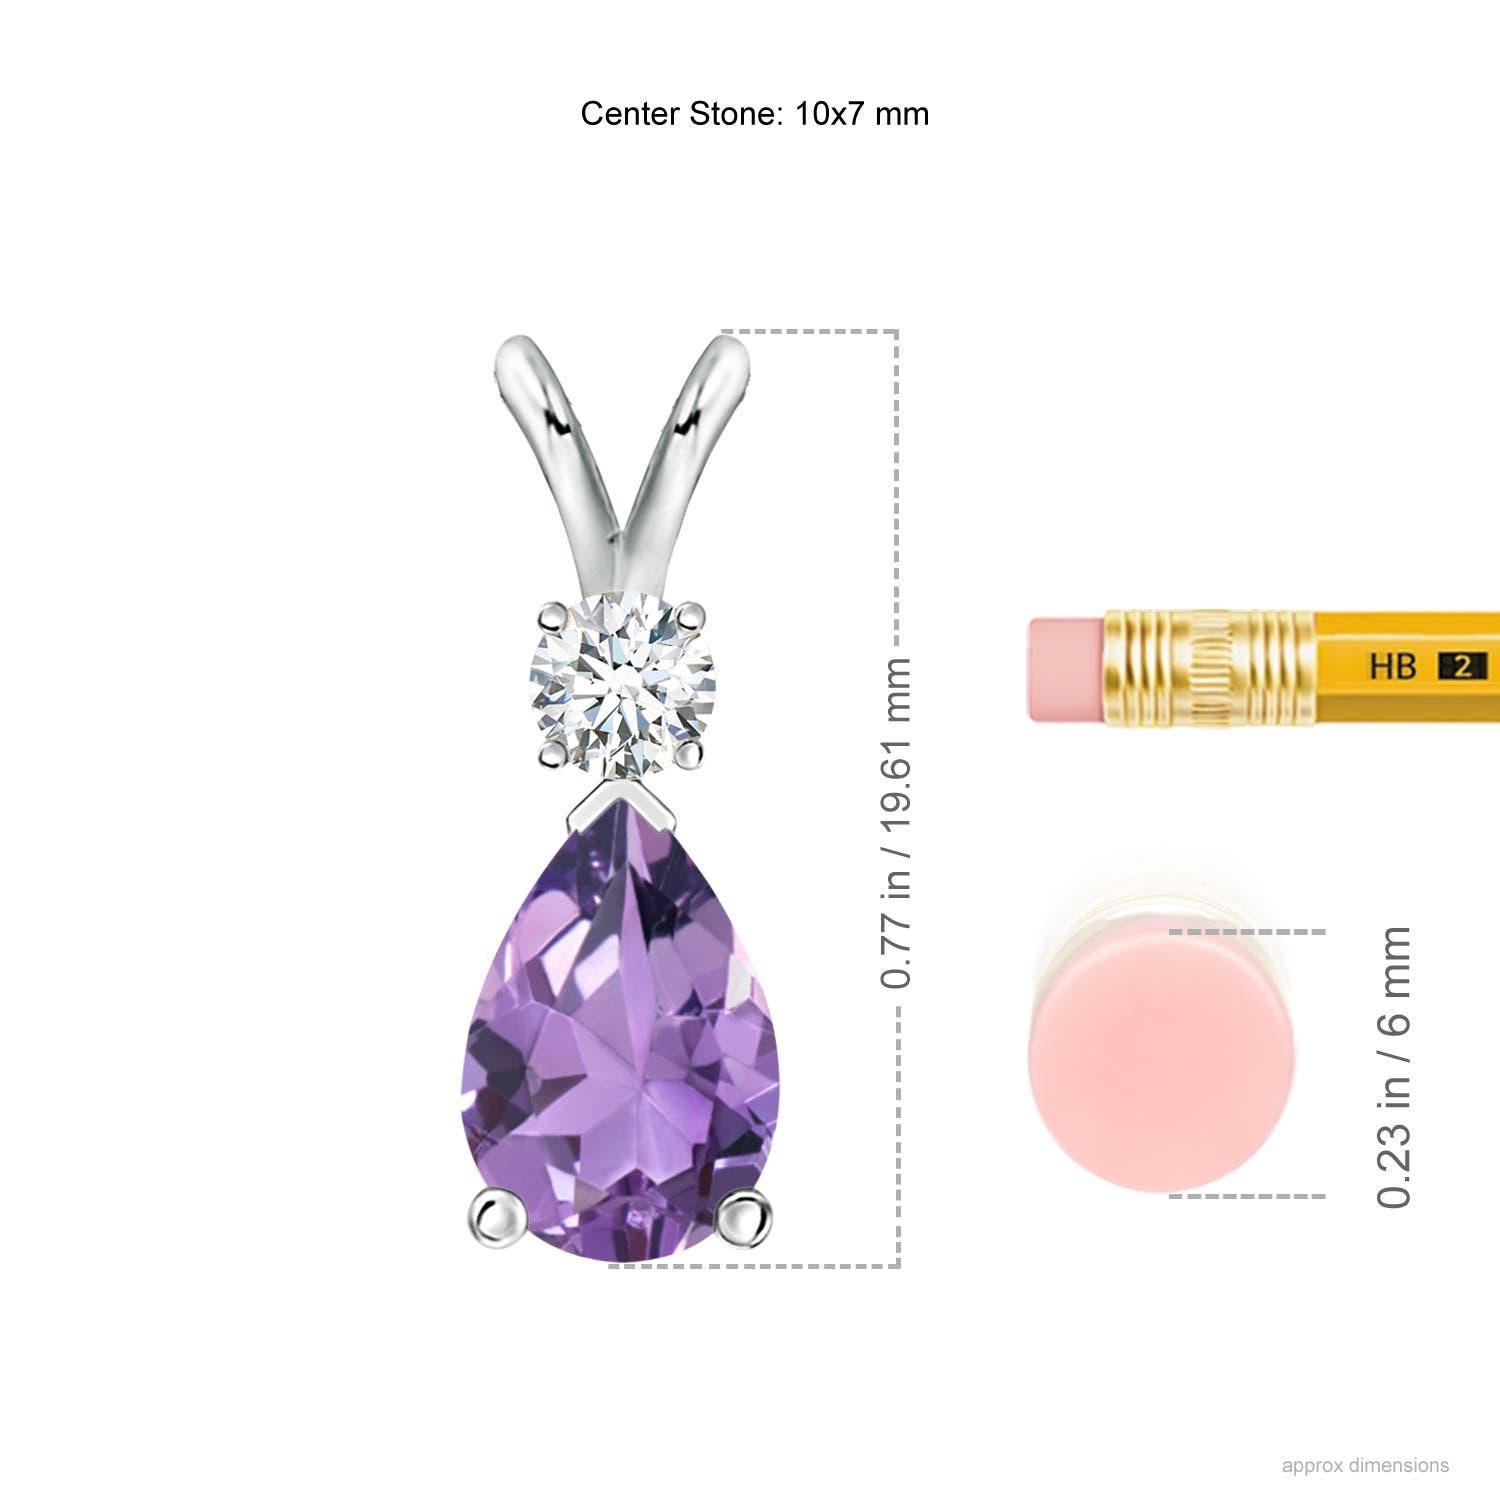 A pear-shaped deep purple amethyst is secured in a prong setting and embellished with a diamond accent on the top. Simple yet stunning, this teardrop amethyst pendant with V bale is sculpted in silver.